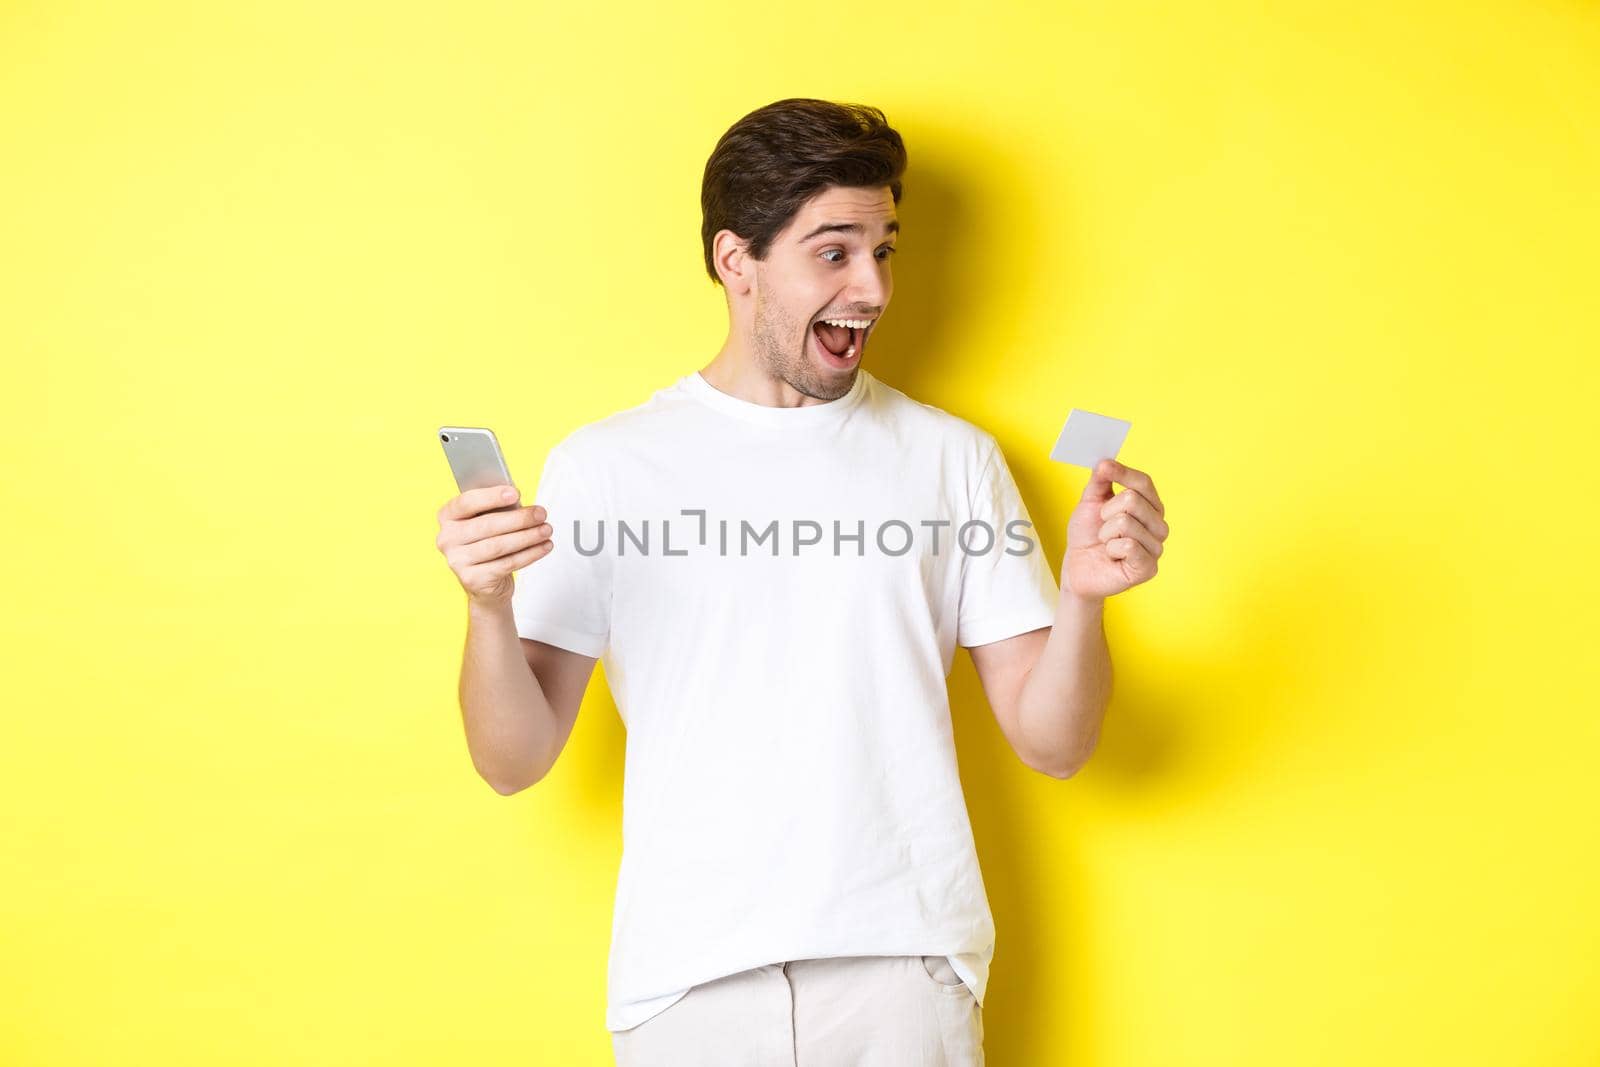 Surprised guy holding smartphone and credit card, online shopping on black friday, standing over yellow background.